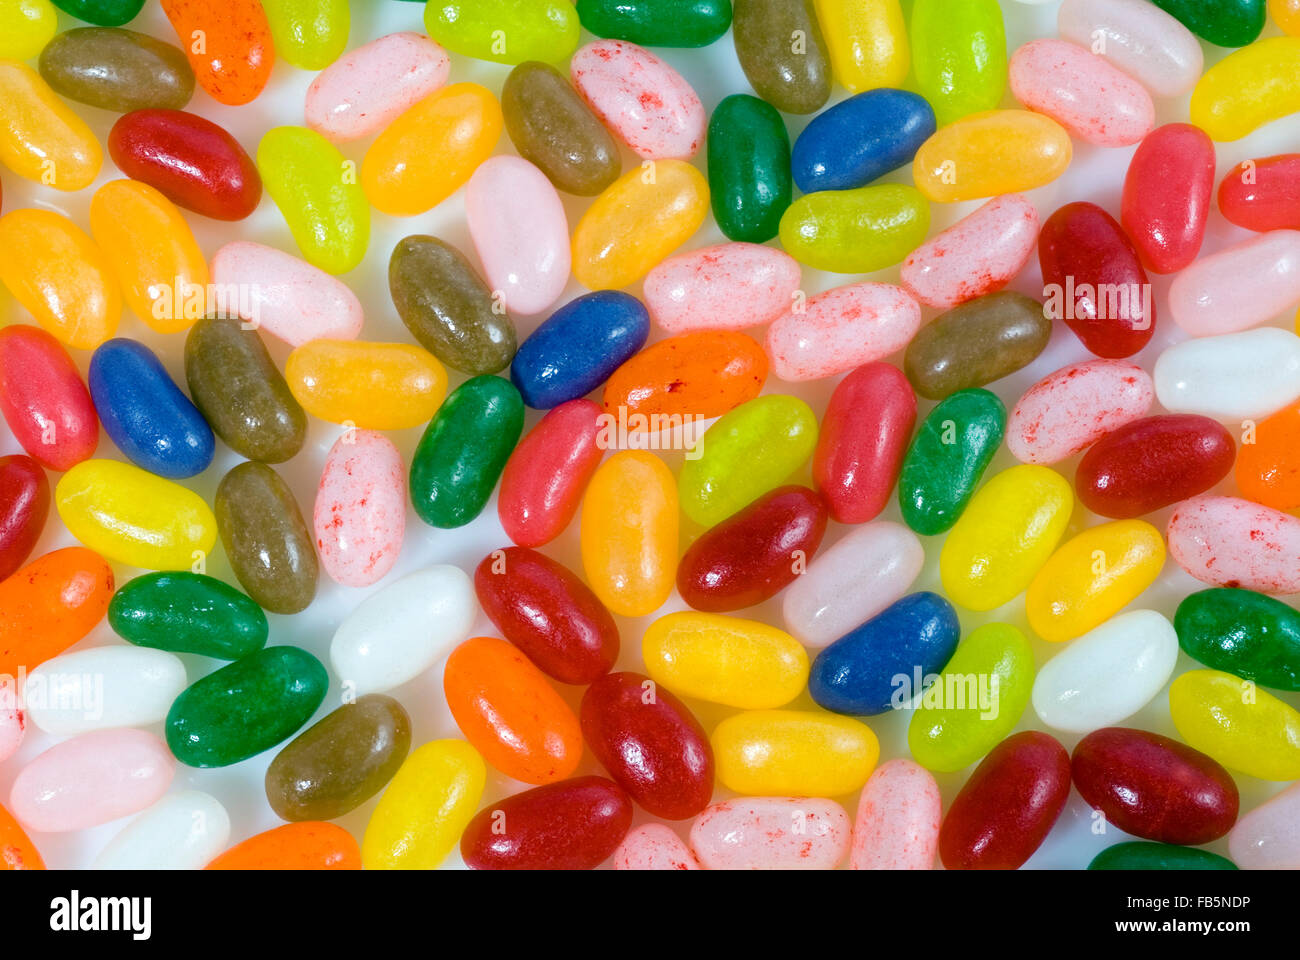 Jelly Beans candy sweets Stock Photo